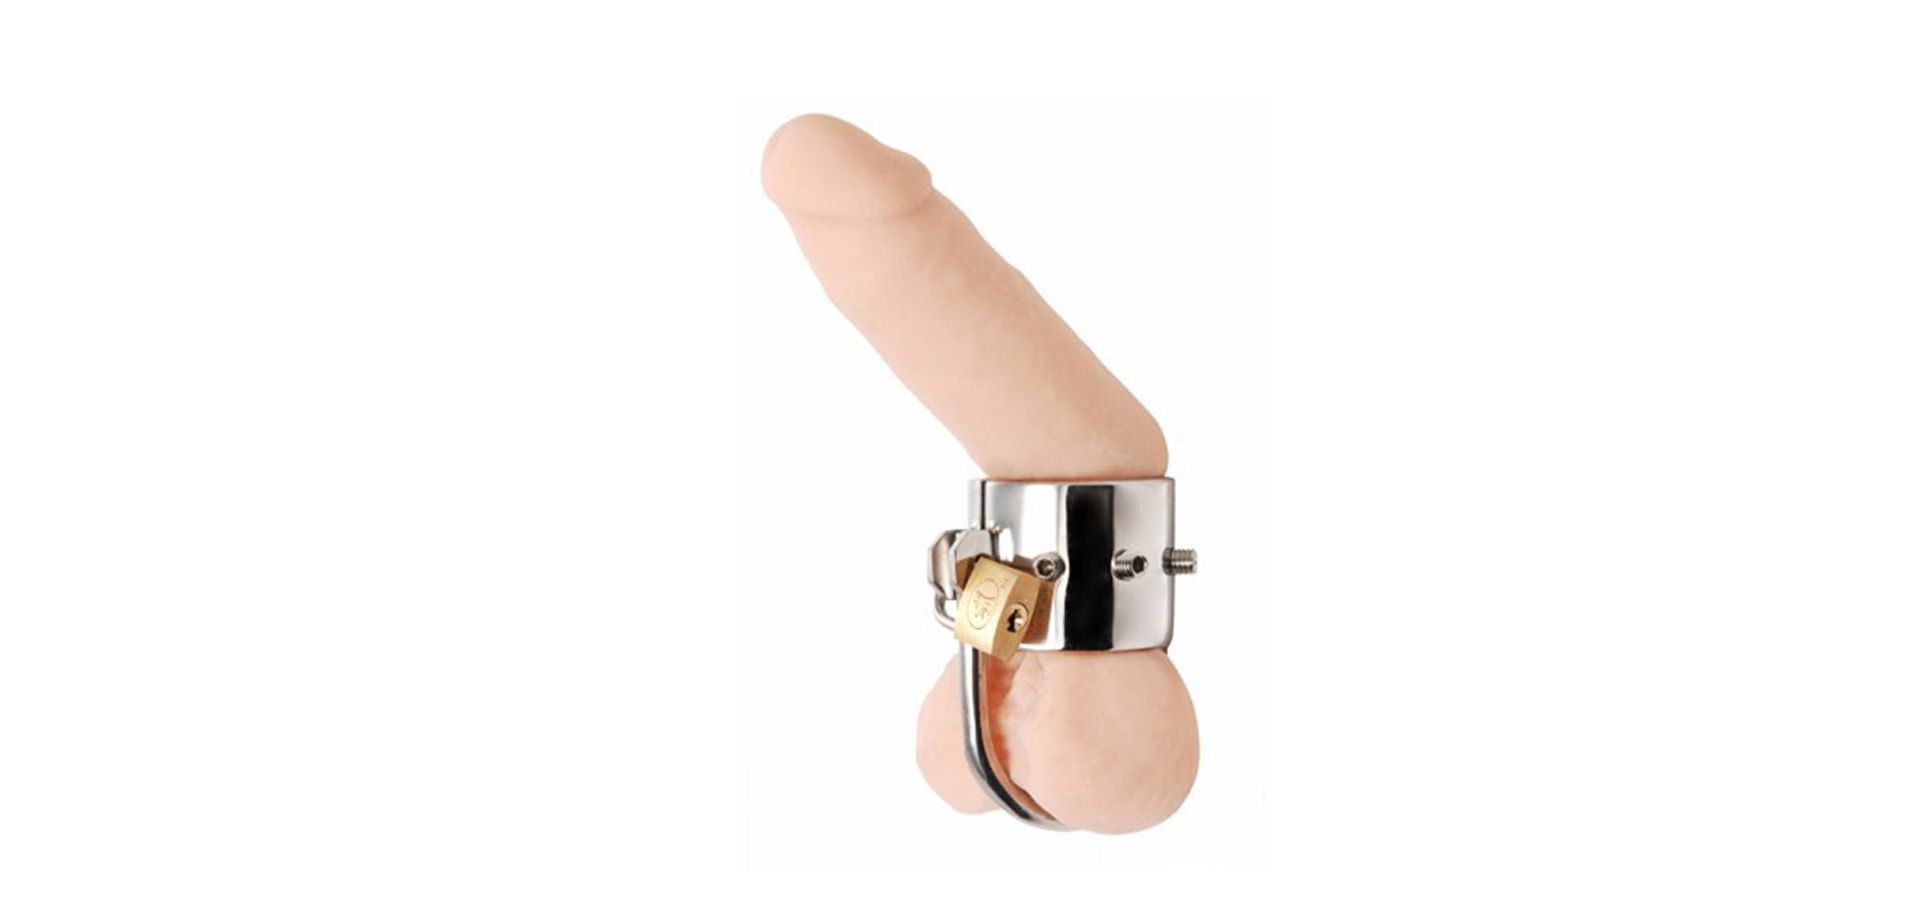 Extreme sex toy for men.